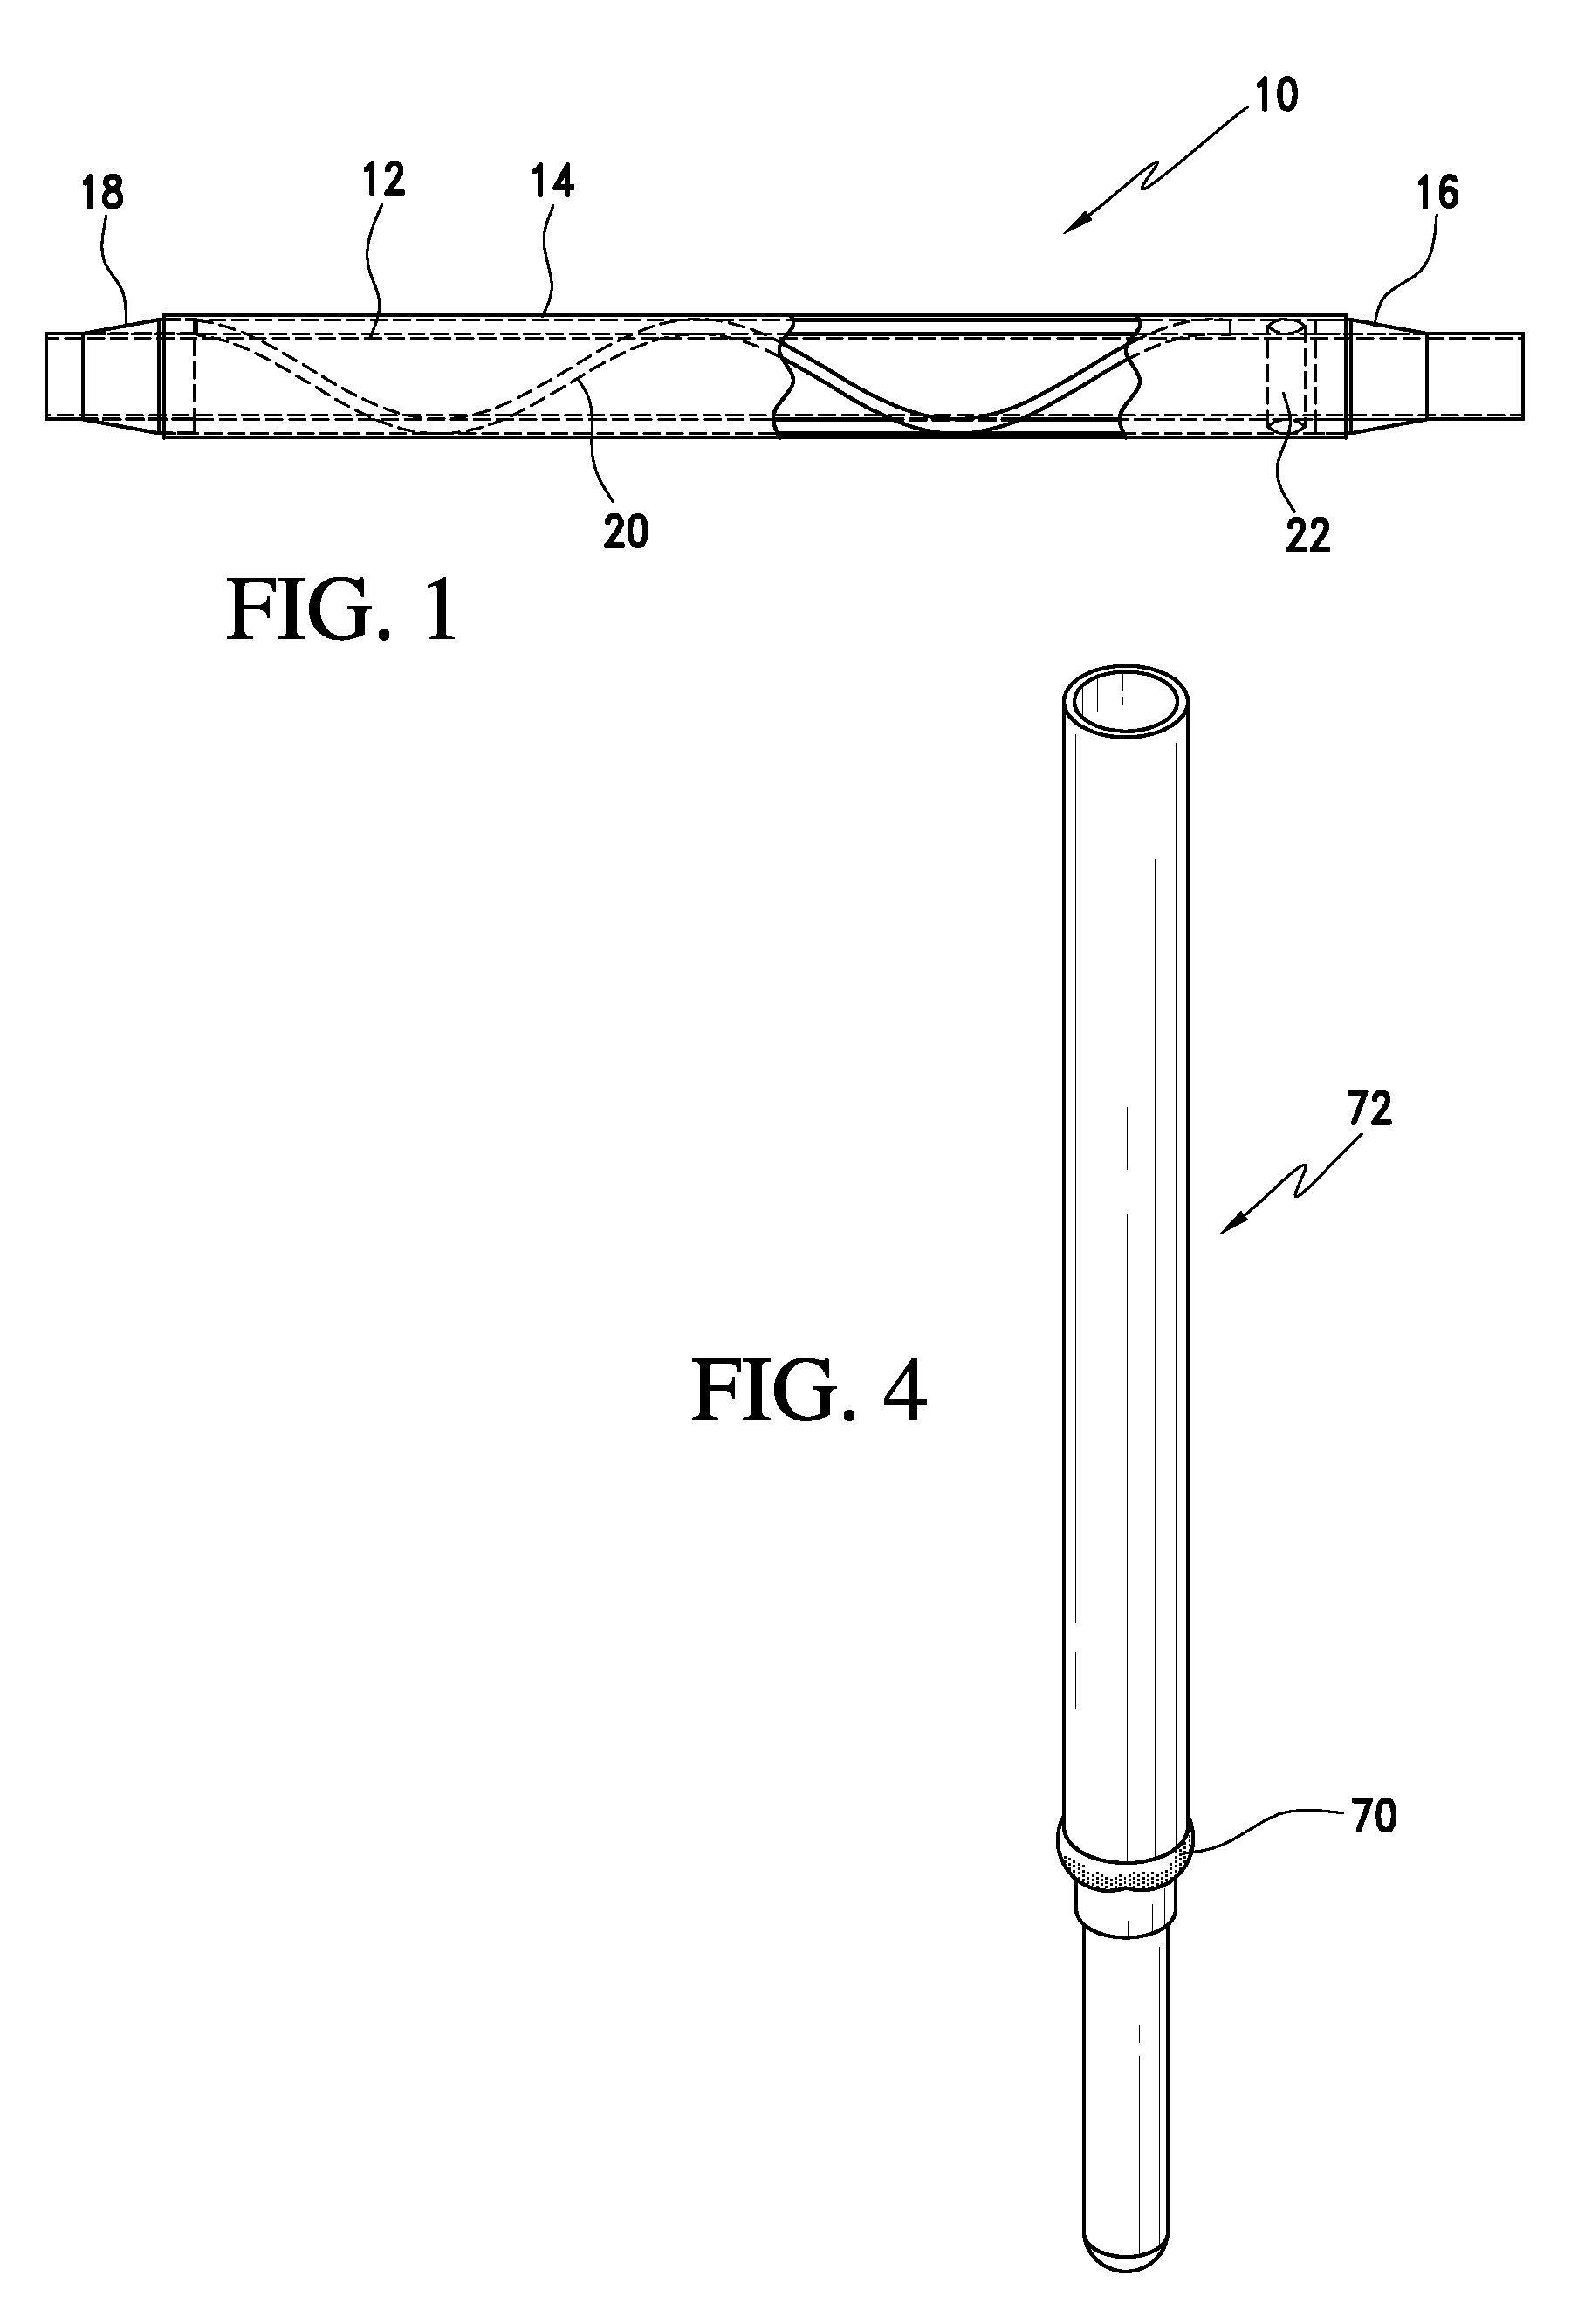 Cryosurgical probe with vacuum insulation tube assembly